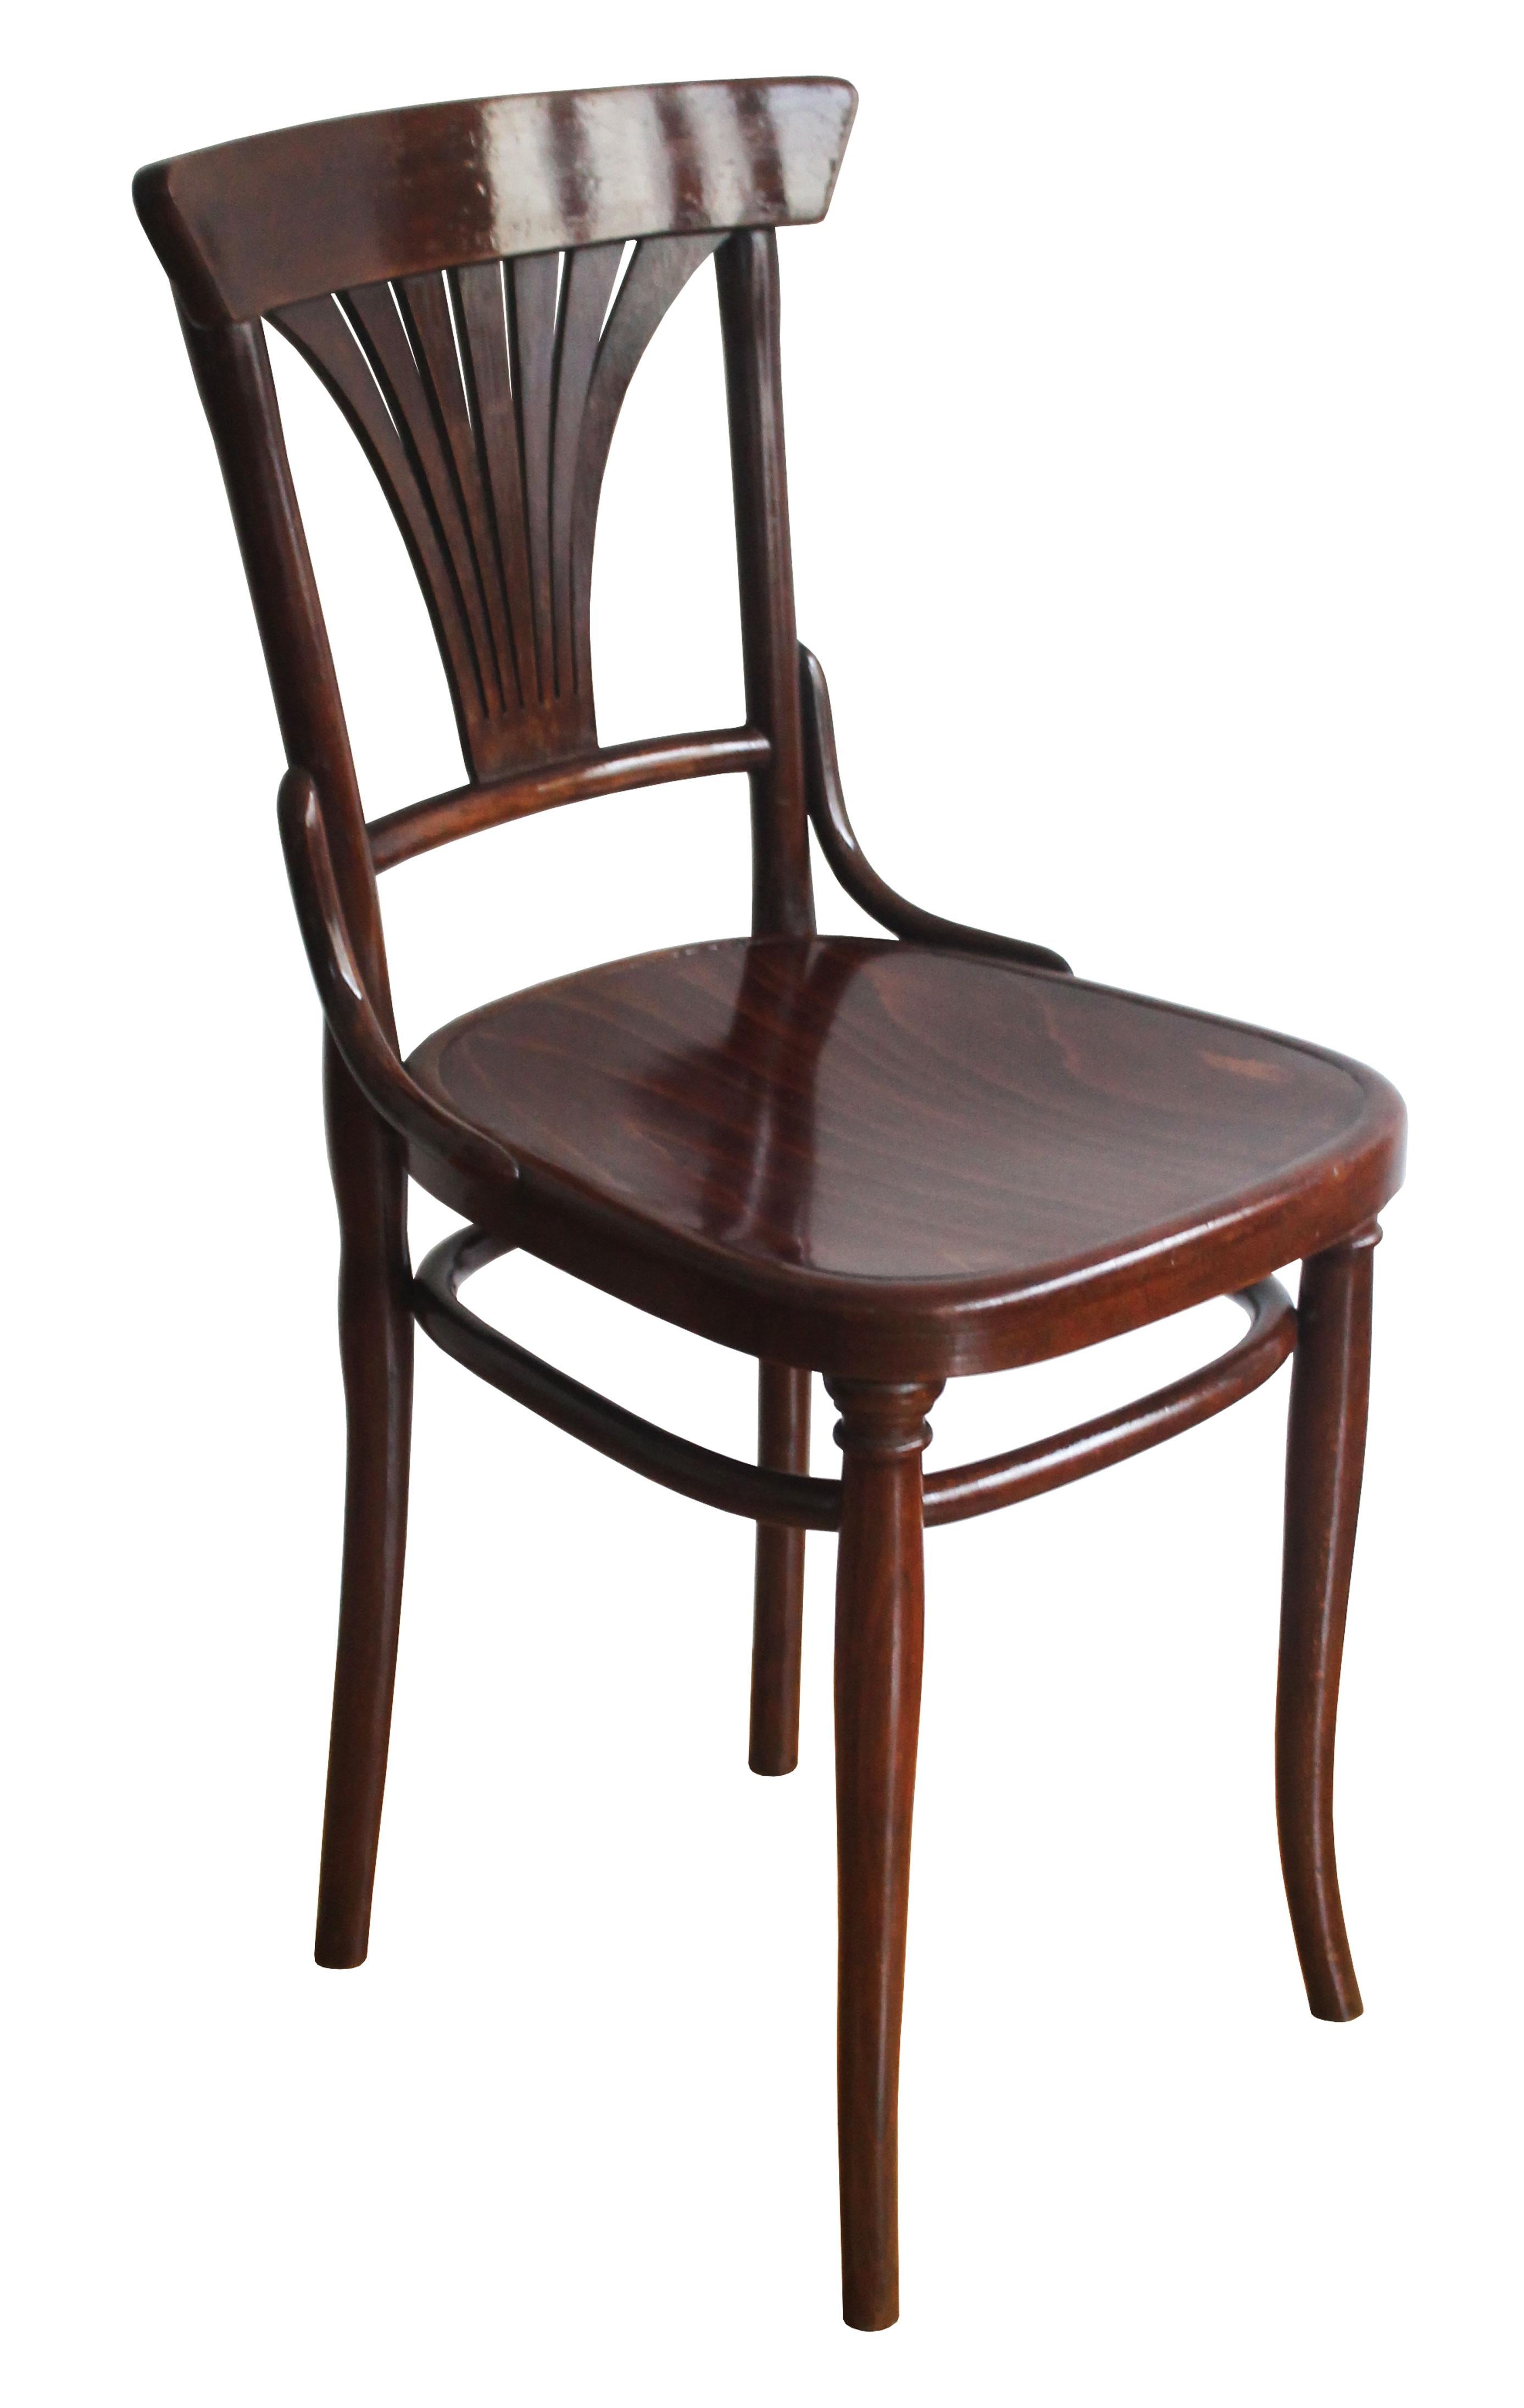 These two dining chairs were originally designed by the Gebüder Thonet company in 1898, and could be found in Thonet sales catalogues as model number 221. These particular pieces are believed to be produced by the Thonet company in one of their